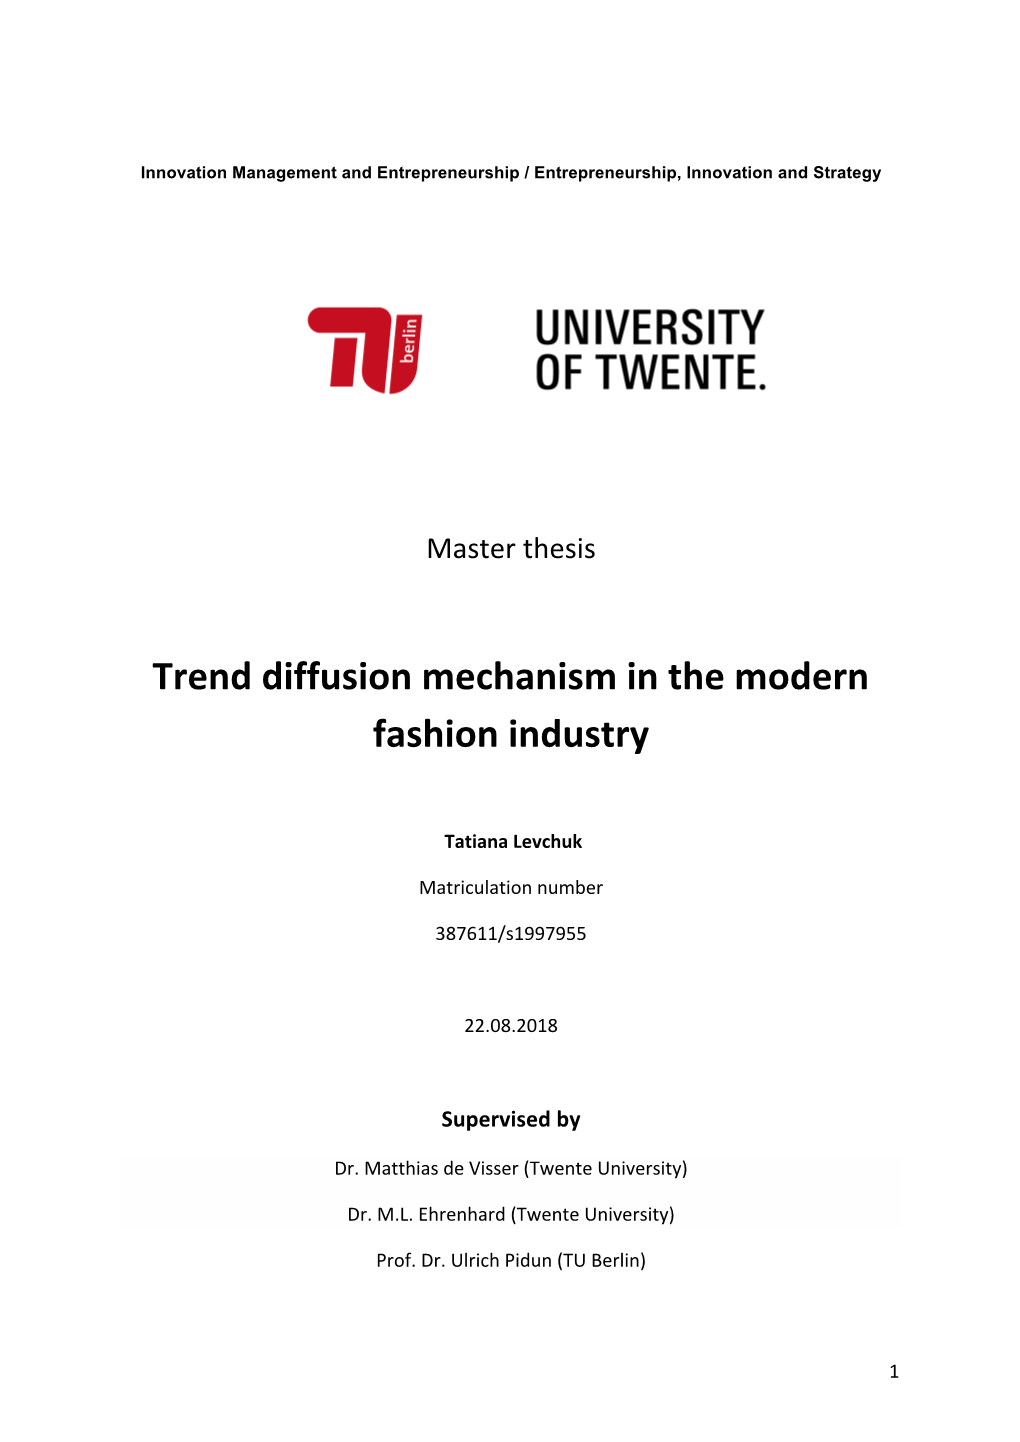 Trend Diffusion Mechanism in the Modern Fashion Industry